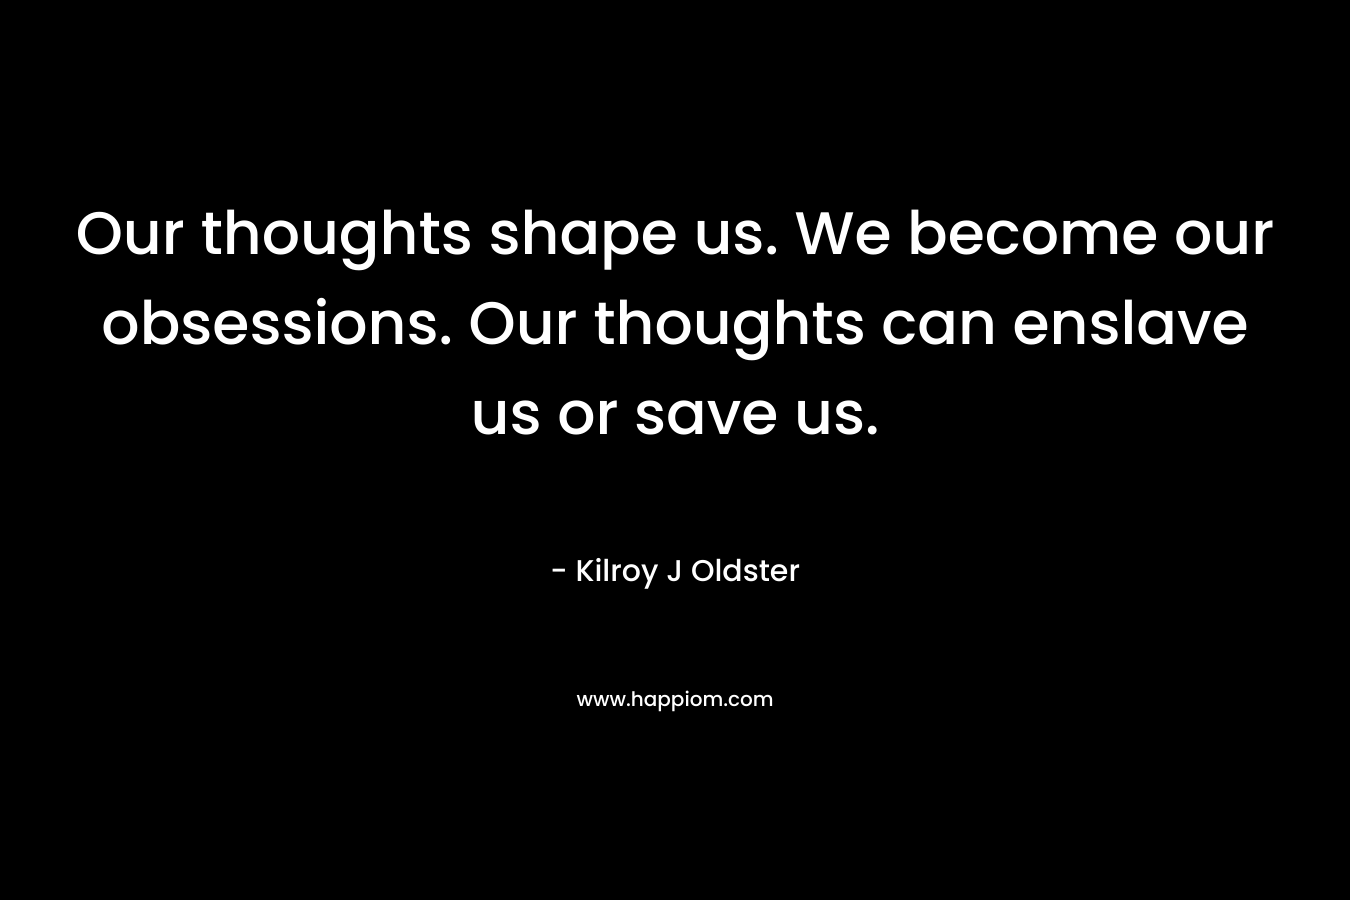 Our thoughts shape us. We become our obsessions. Our thoughts can enslave us or save us. – Kilroy J Oldster